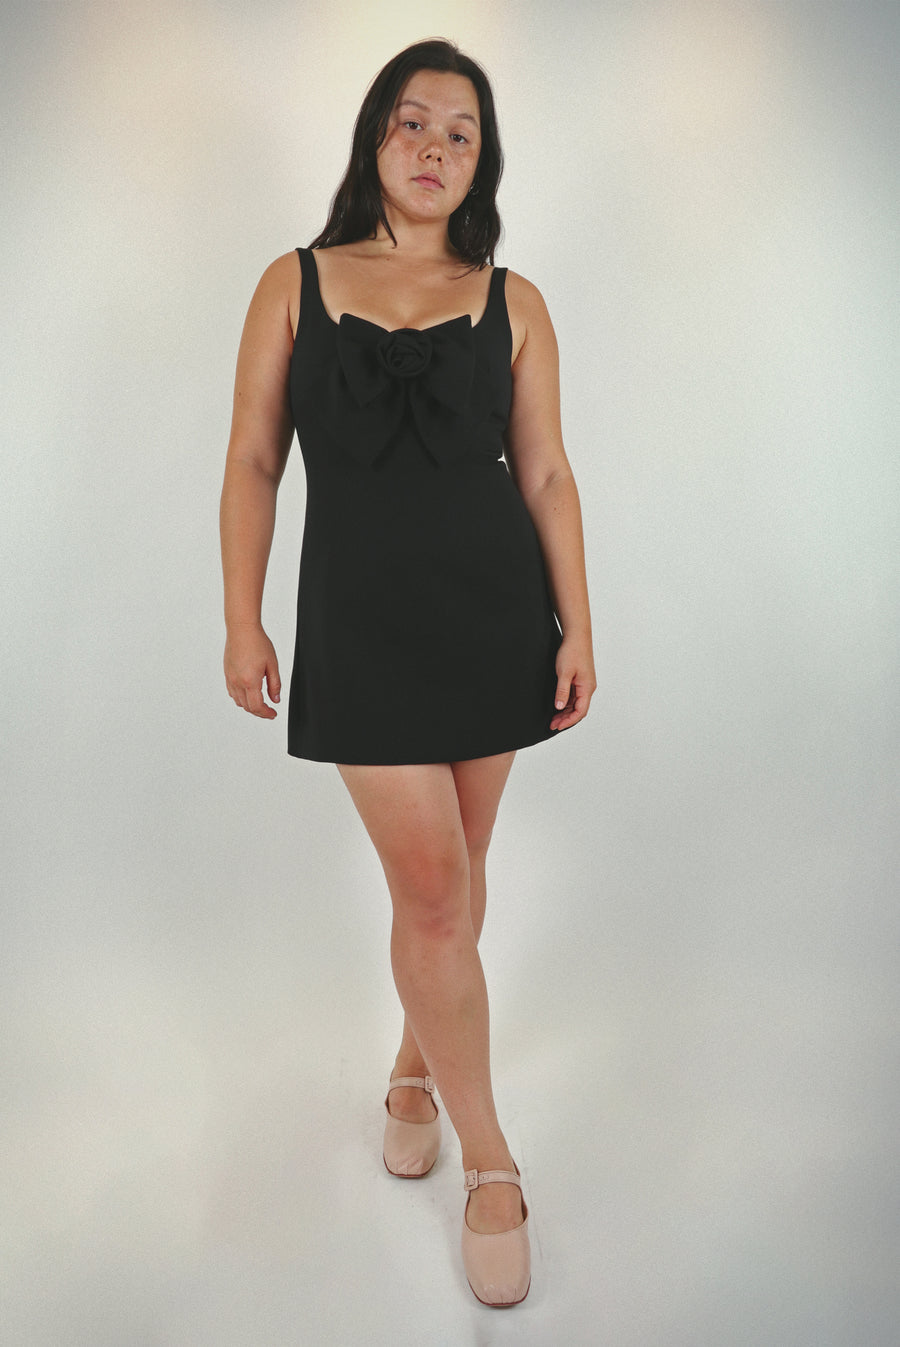 Tailored mini dress in black with oversized bow at front on model